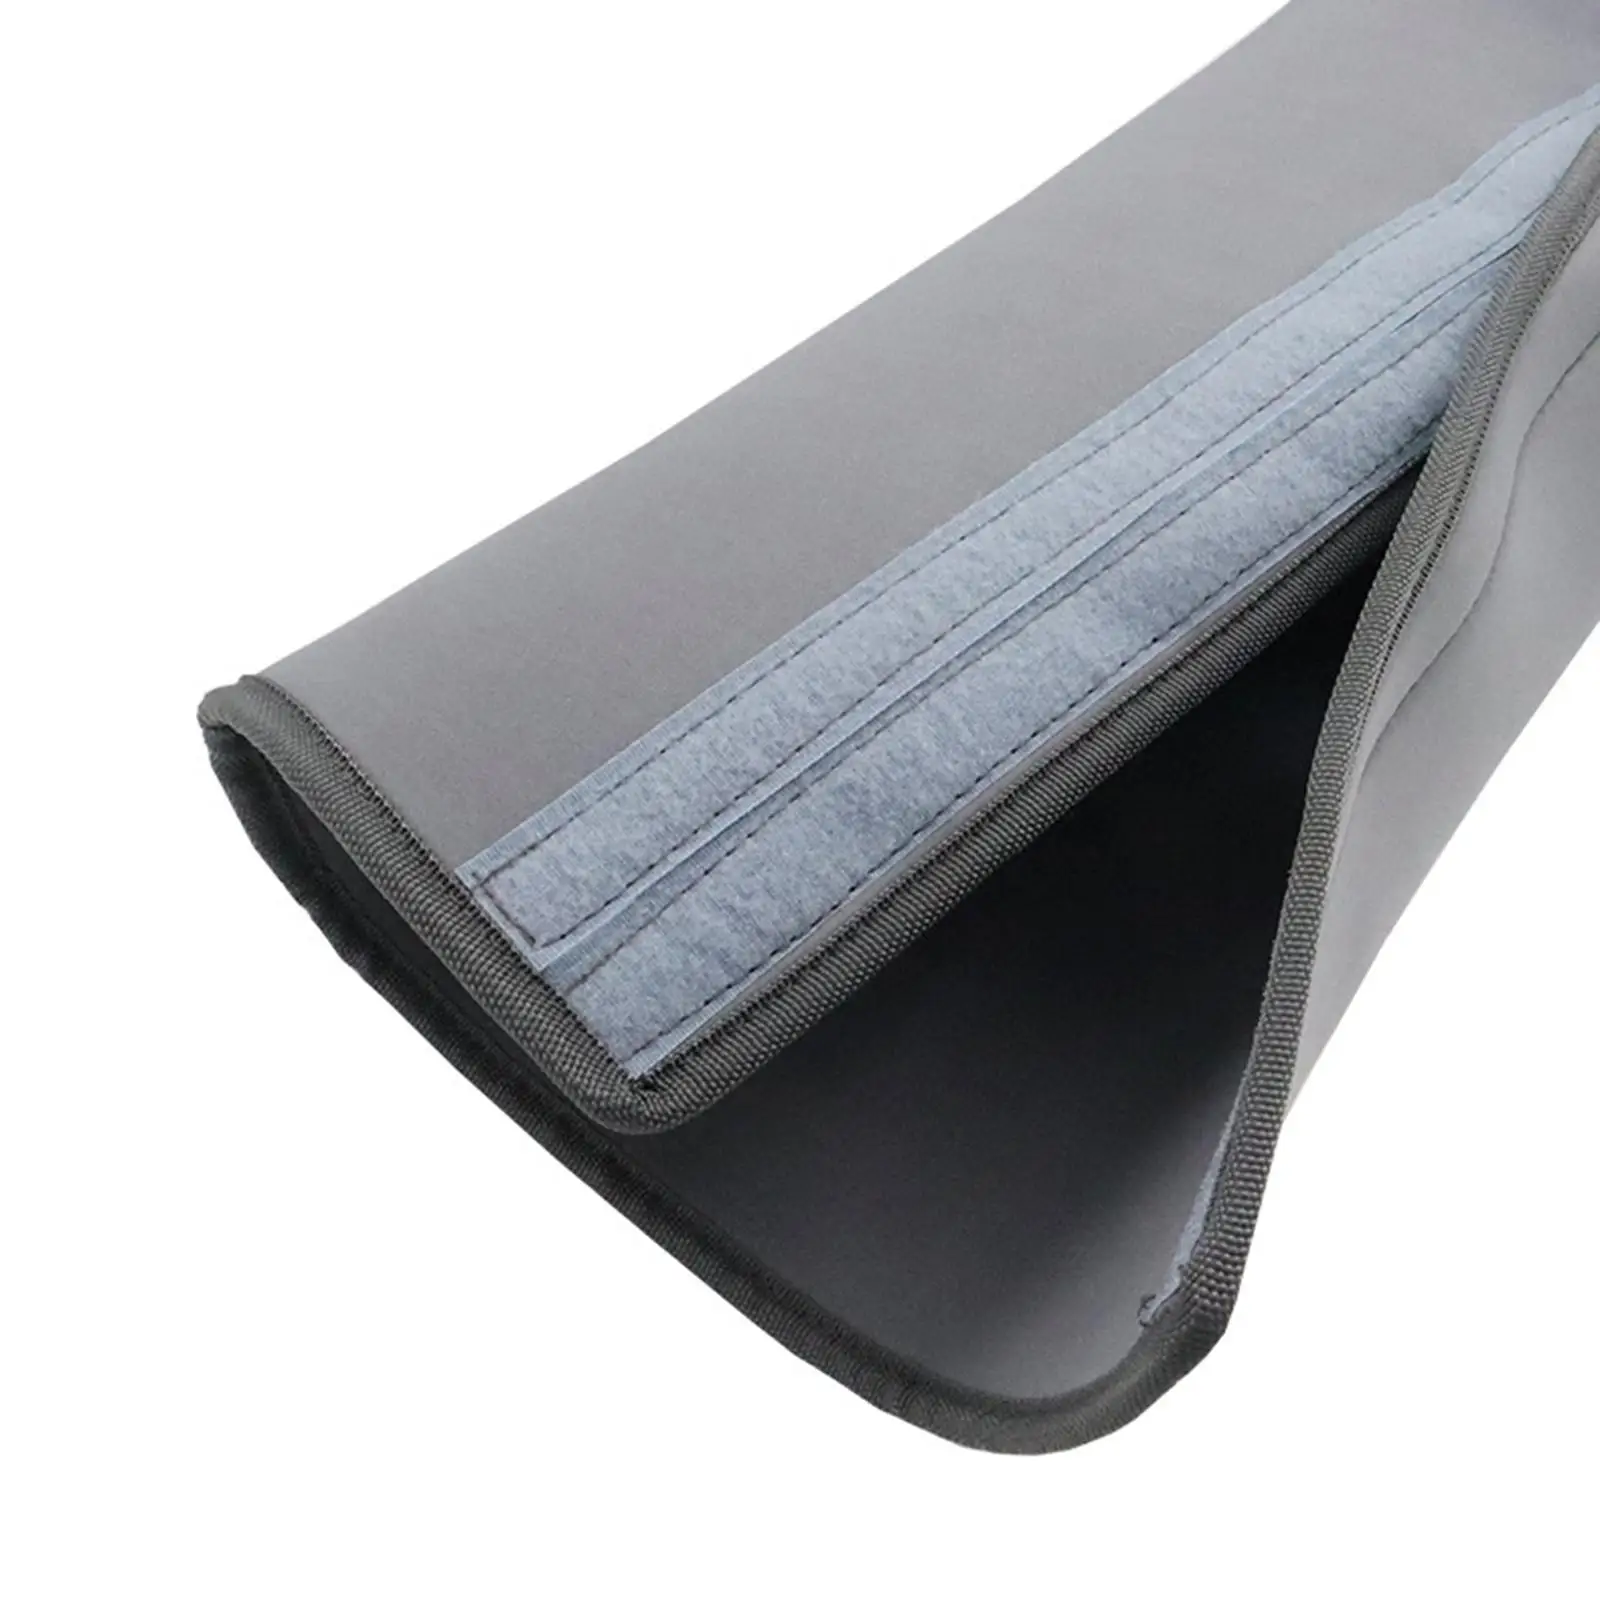 Air Conditioner Hose Wrap Cover for 5 inch 6 inch Tube Diameter for Outlet Pipe Tube Exhaust Duct Vent